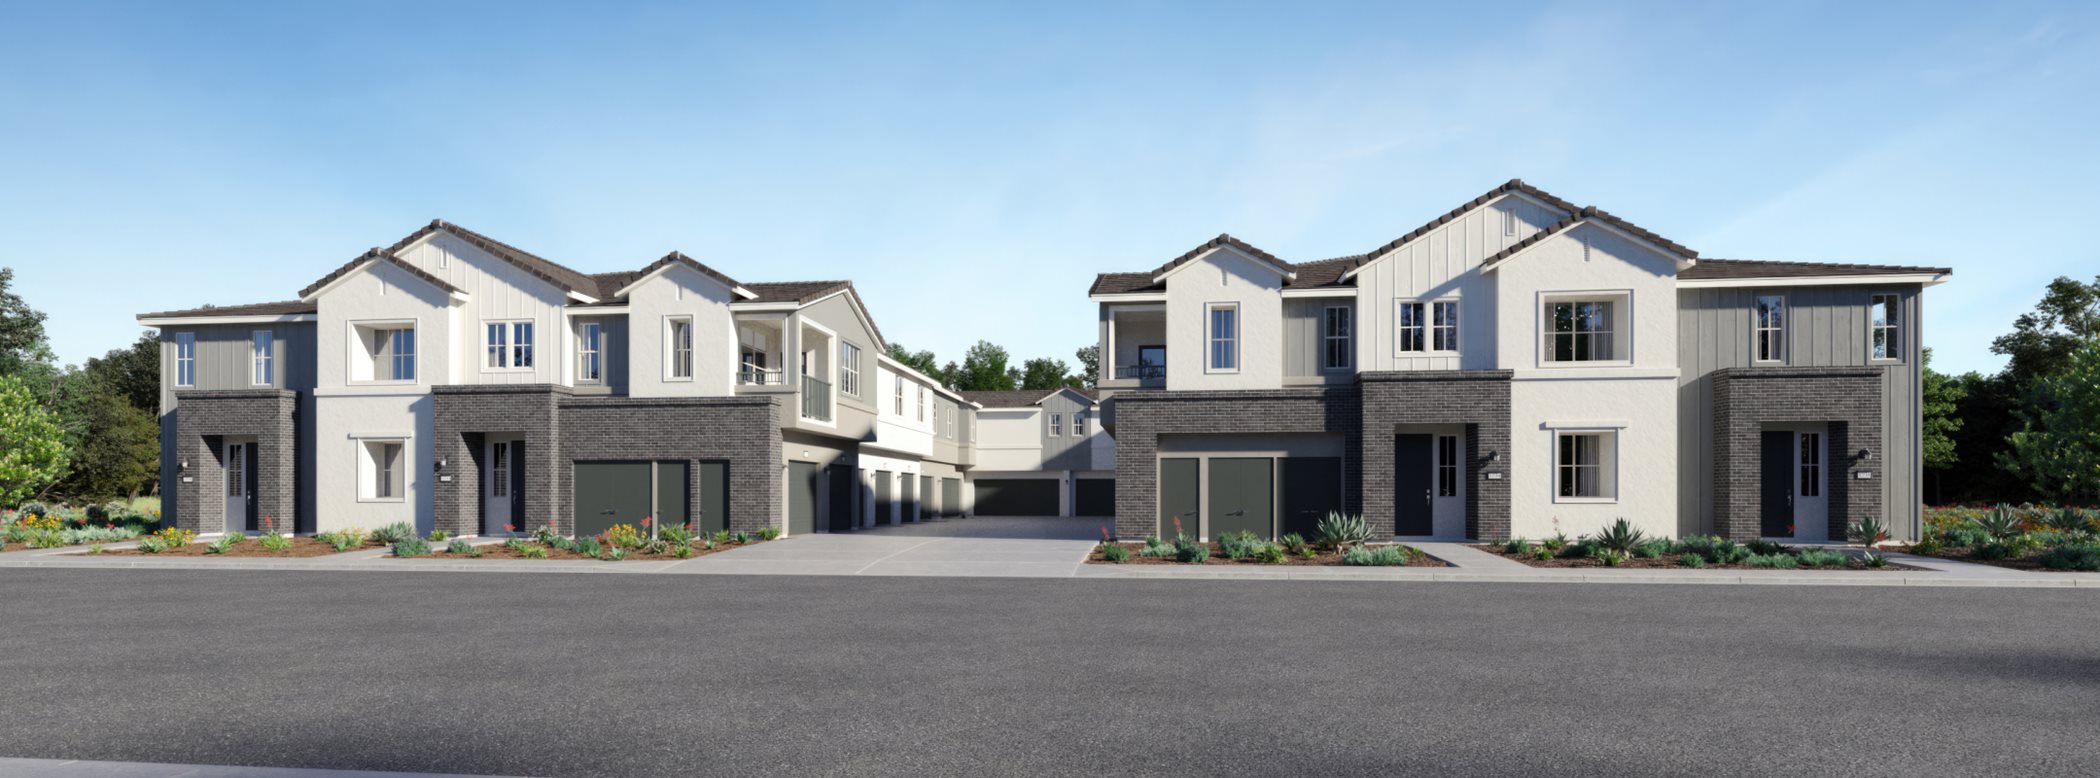 Homes at the Falloncrest masterplan